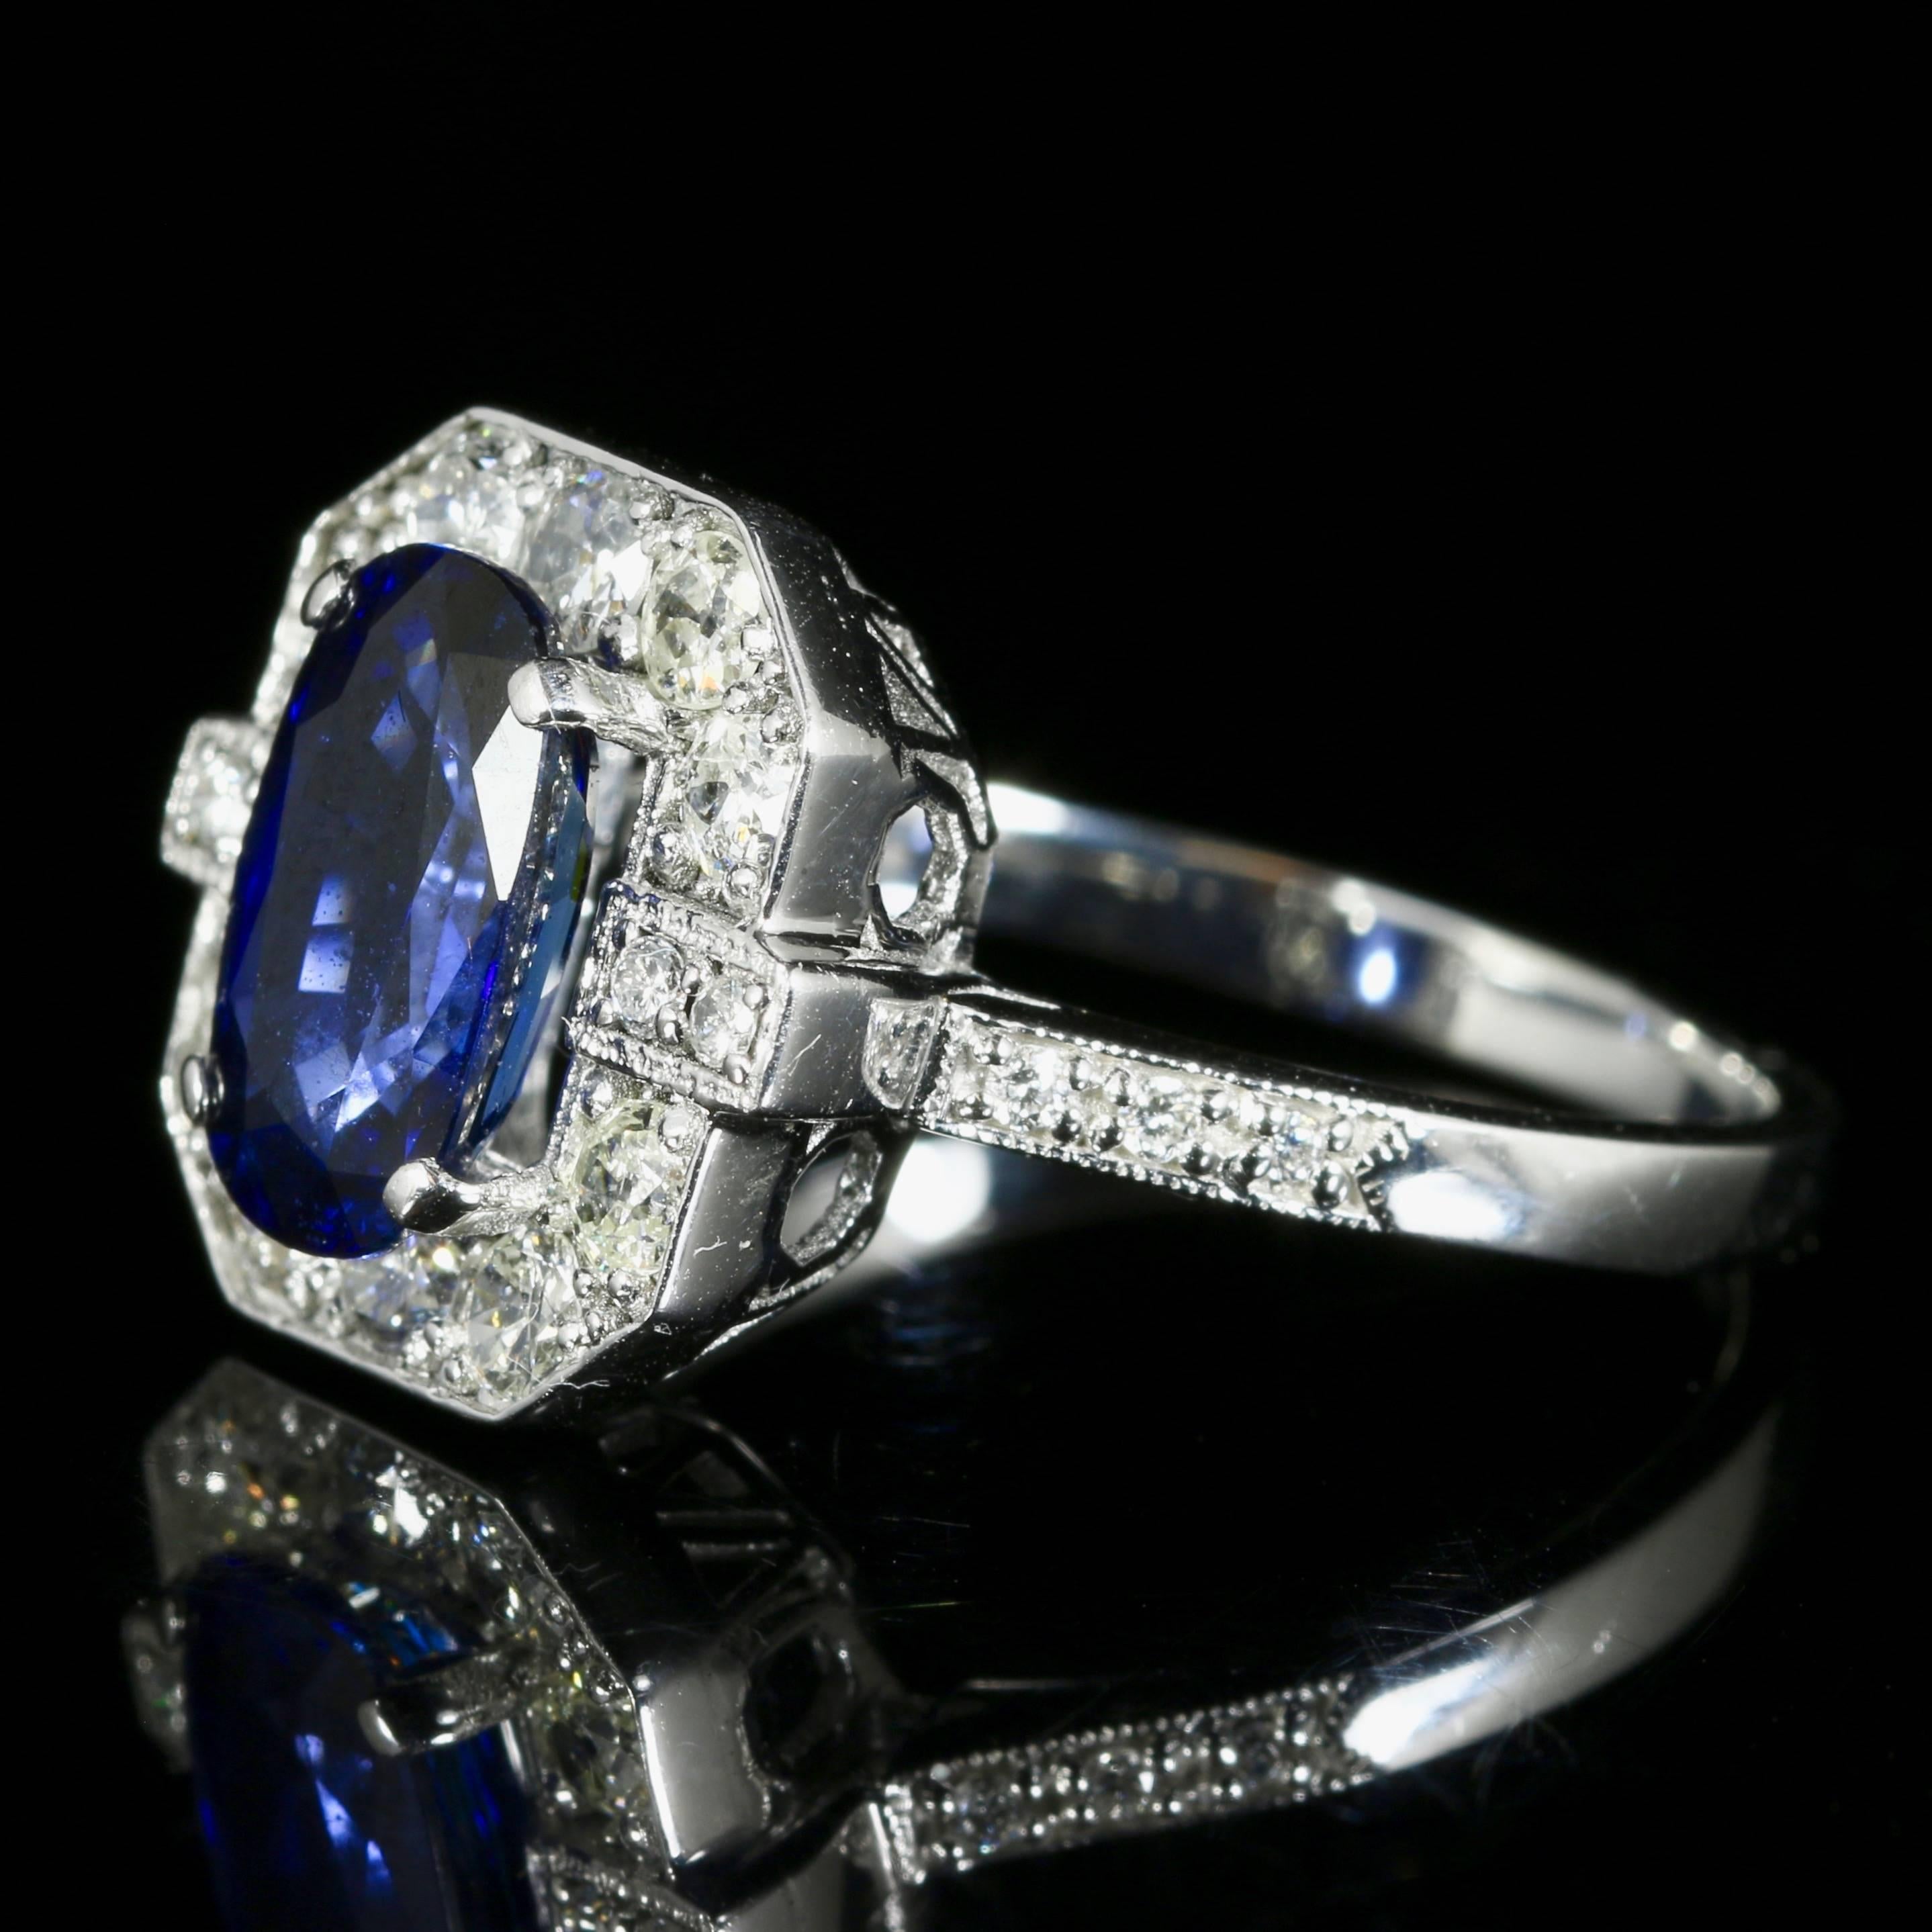 This is a very beautiful 18ct white gold ring which boasts a fabulous rich blue sapphire and encrusted with old cut diamonds.

The ring is set with a 2.50ct sapphire in the centre which is surrounded by magnificent diamonds, even taper down the